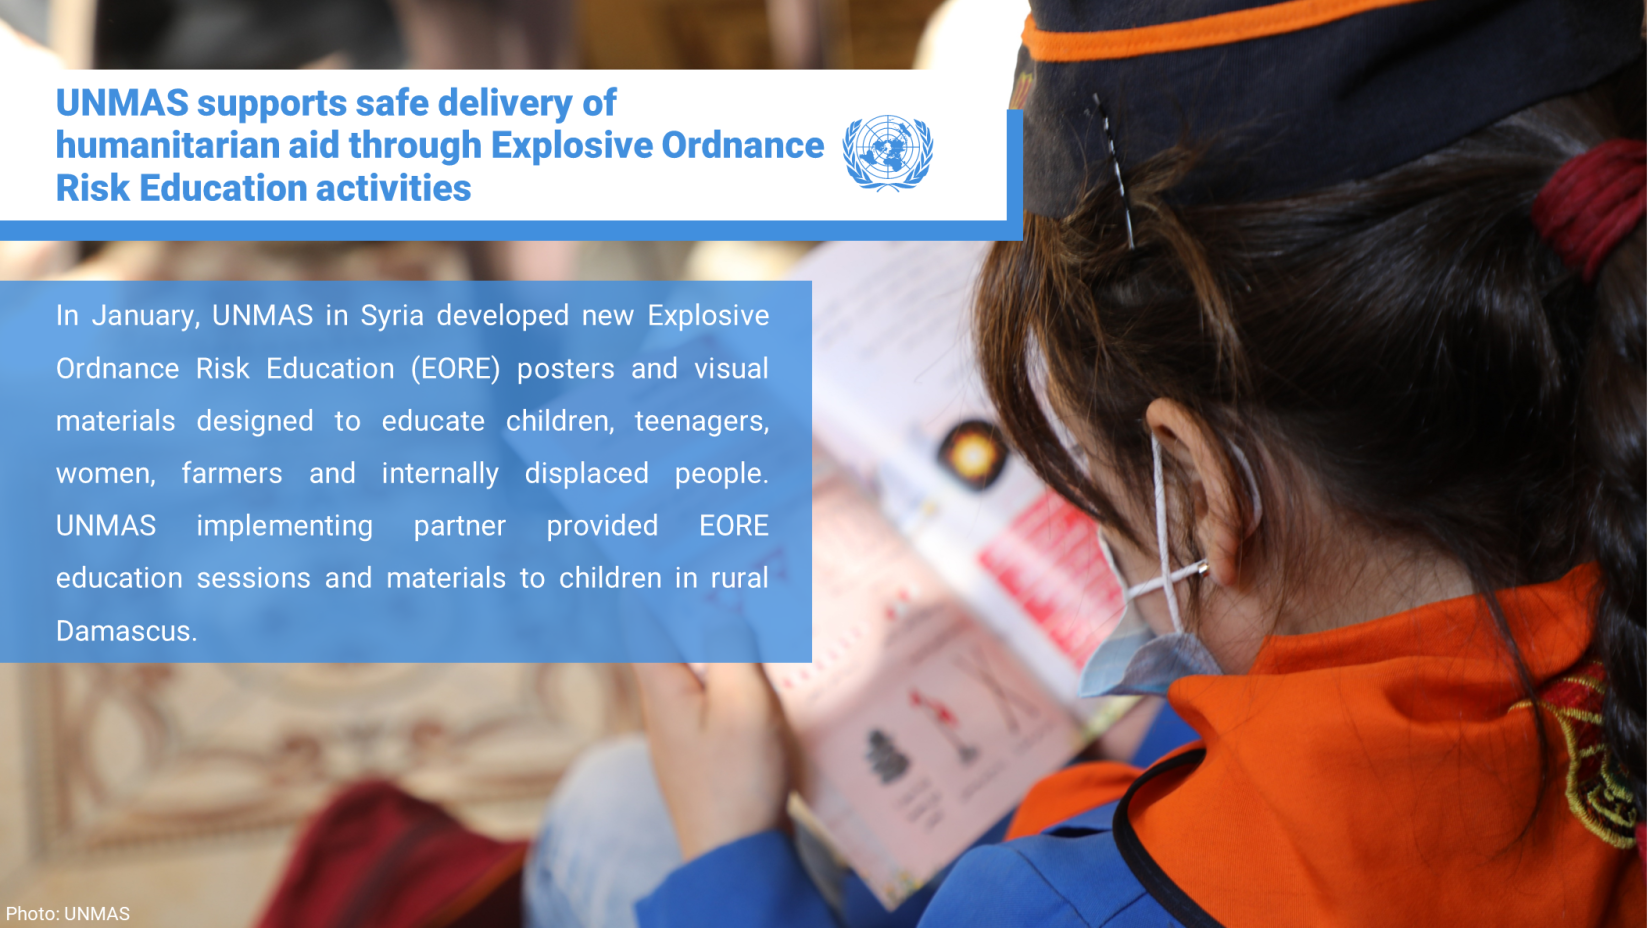 UNMAS SUPPORTS SAFE DELIVERY OF HUMANITARIAN AID THROUGH EXPLOSIVE ORDNANCE RISK EDUCATION ACTIVITIES